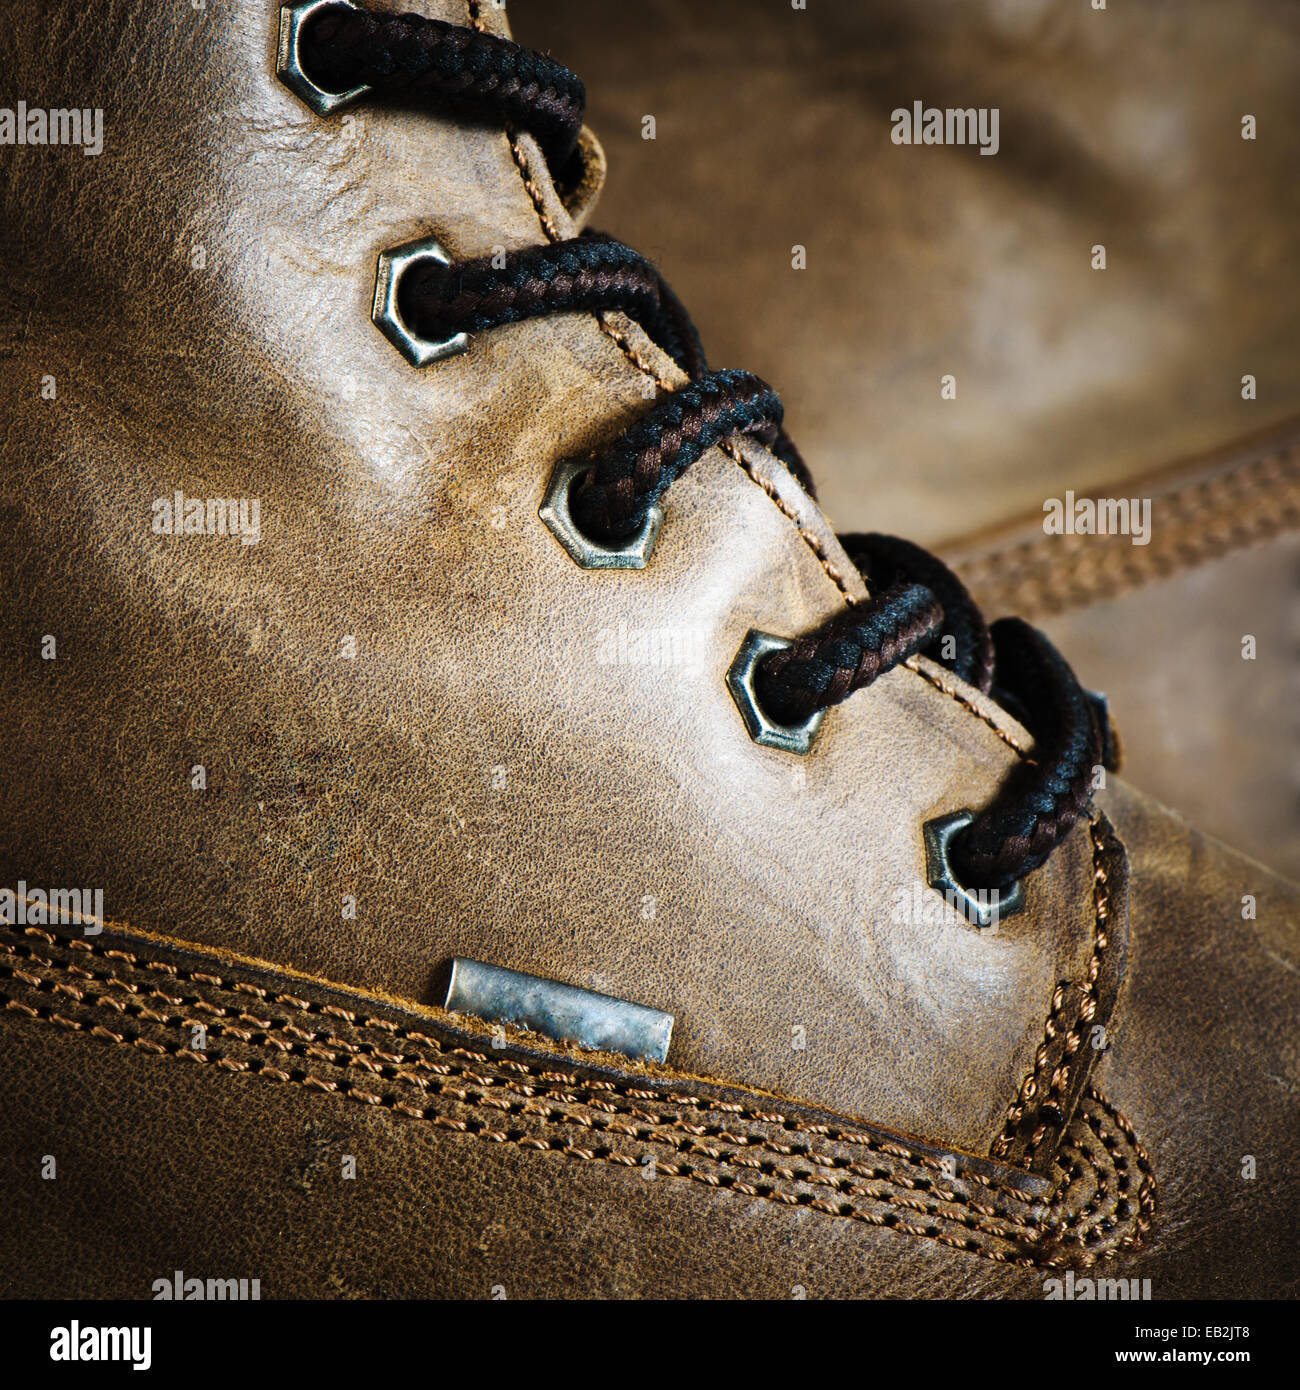 Brown leather shoe, close-up Stock Photo